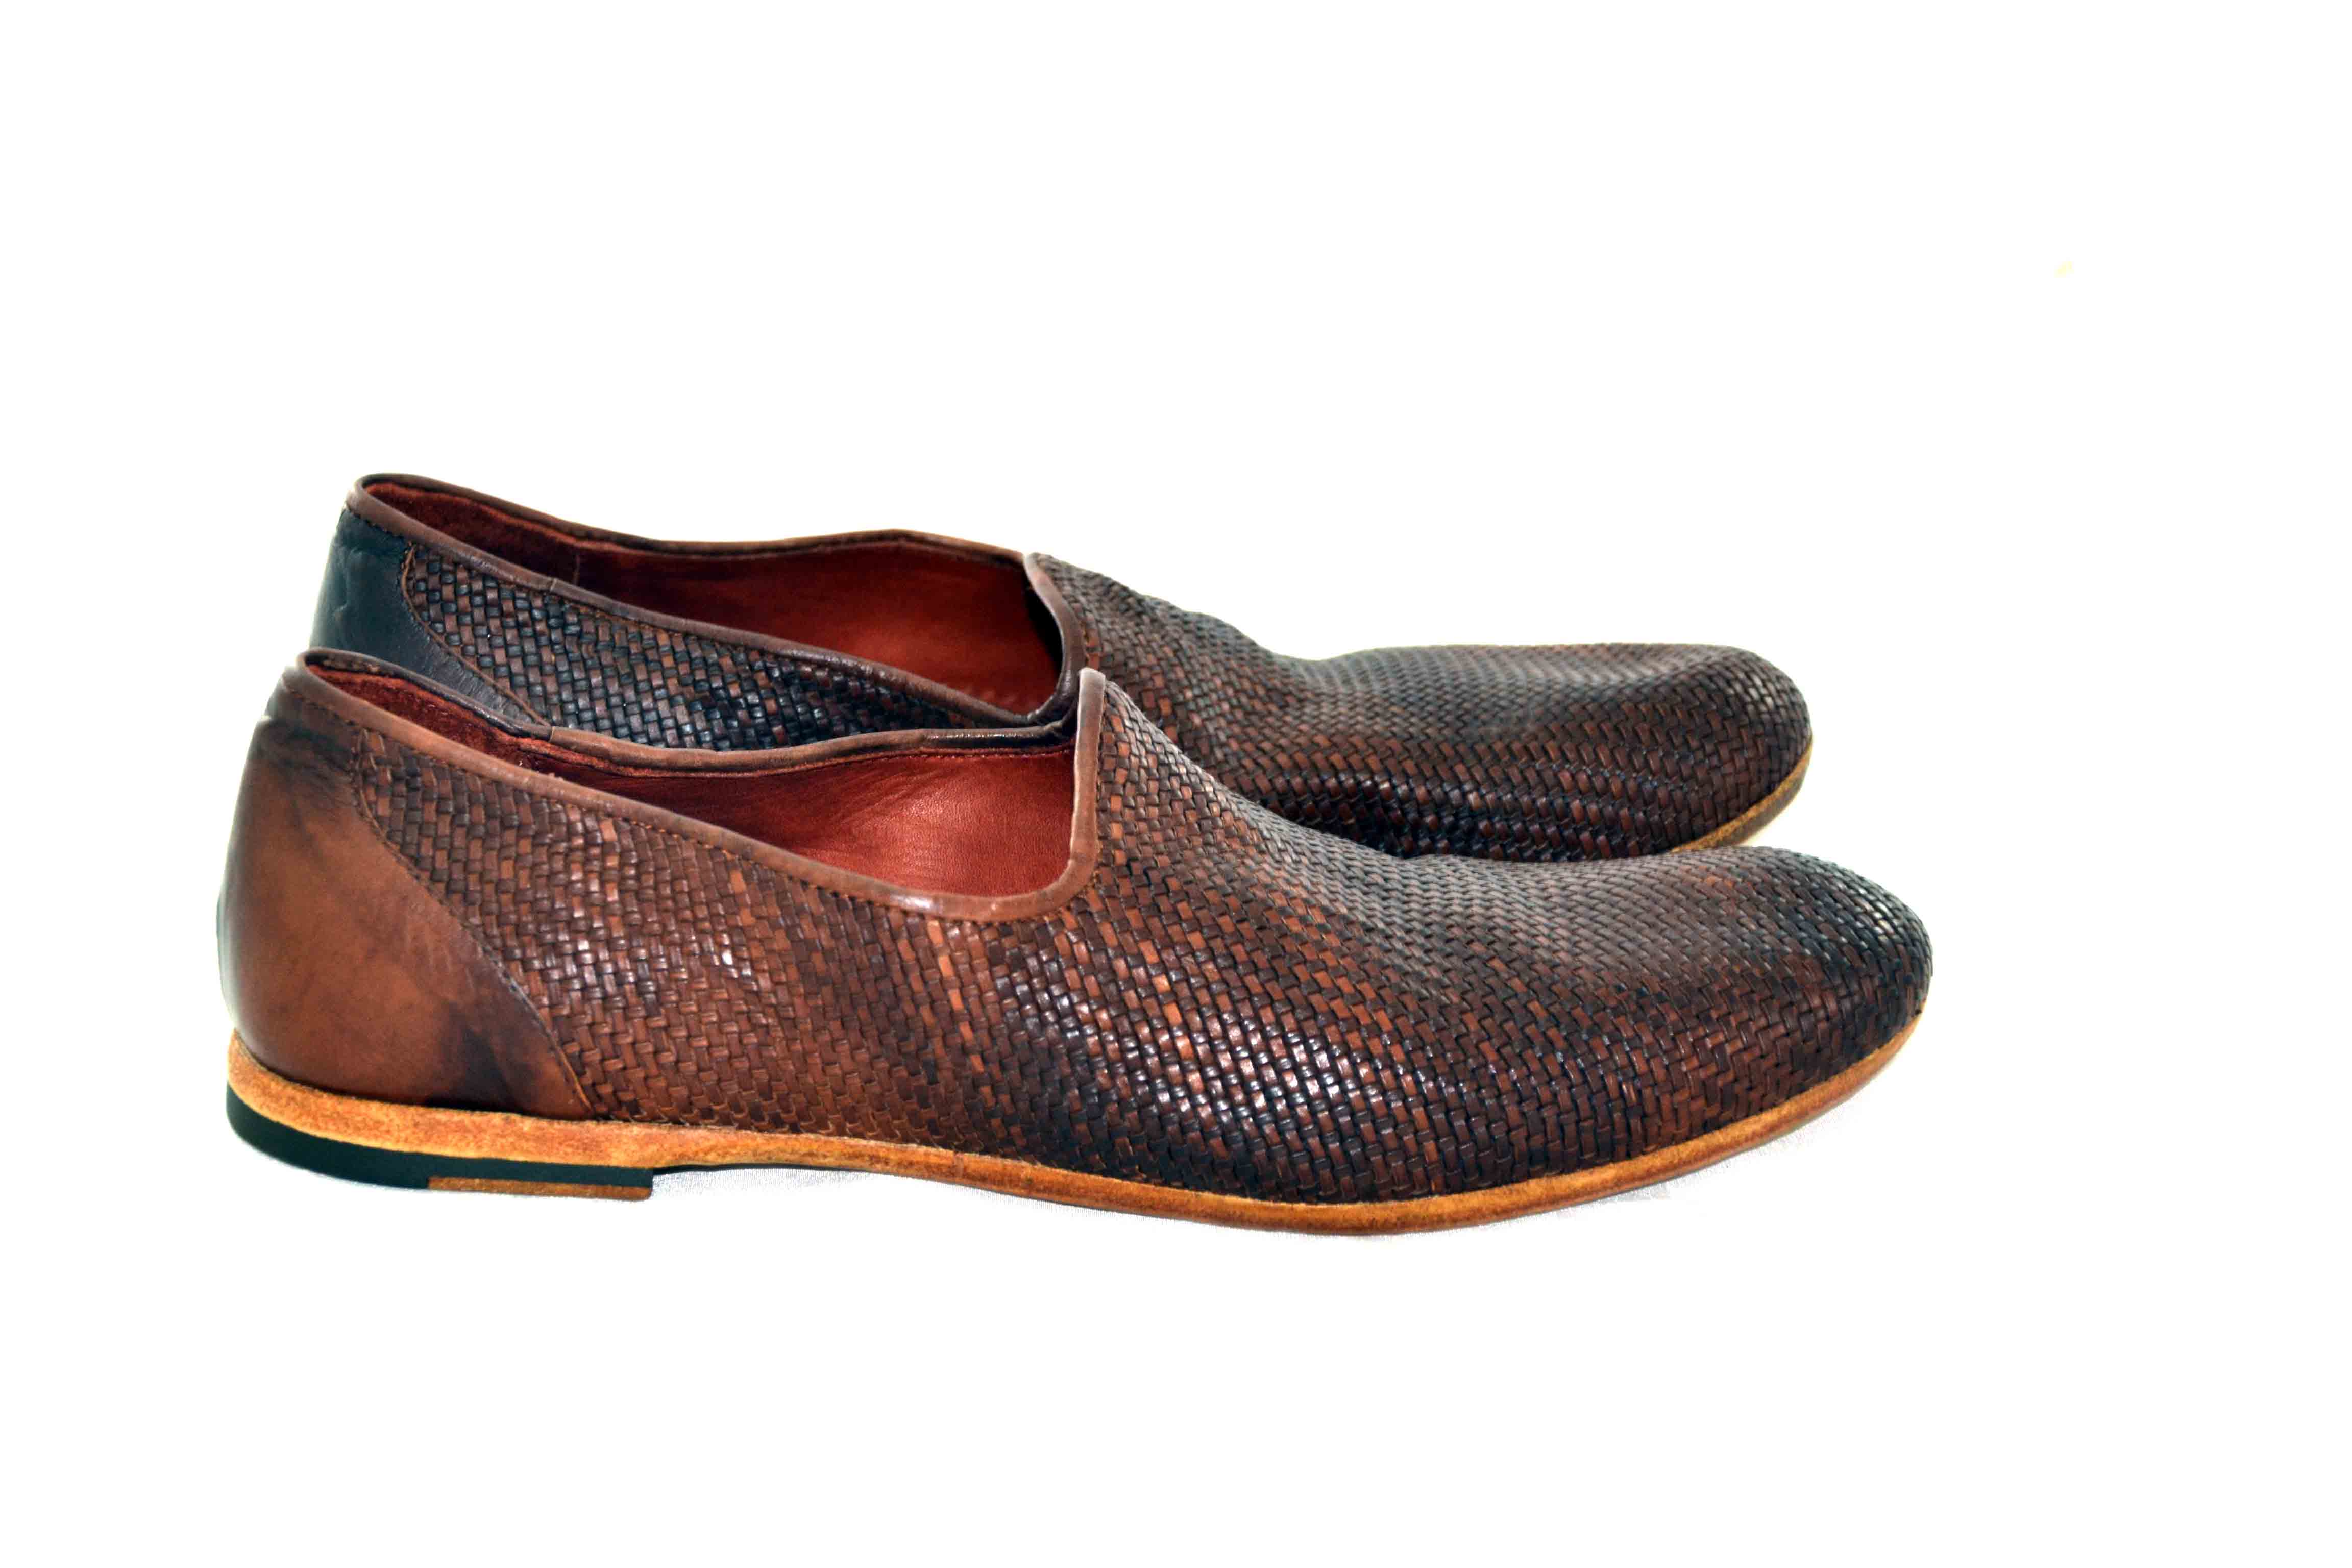 LAST PAIR 42-HAND WOVEN CANGAROO LOAFERS